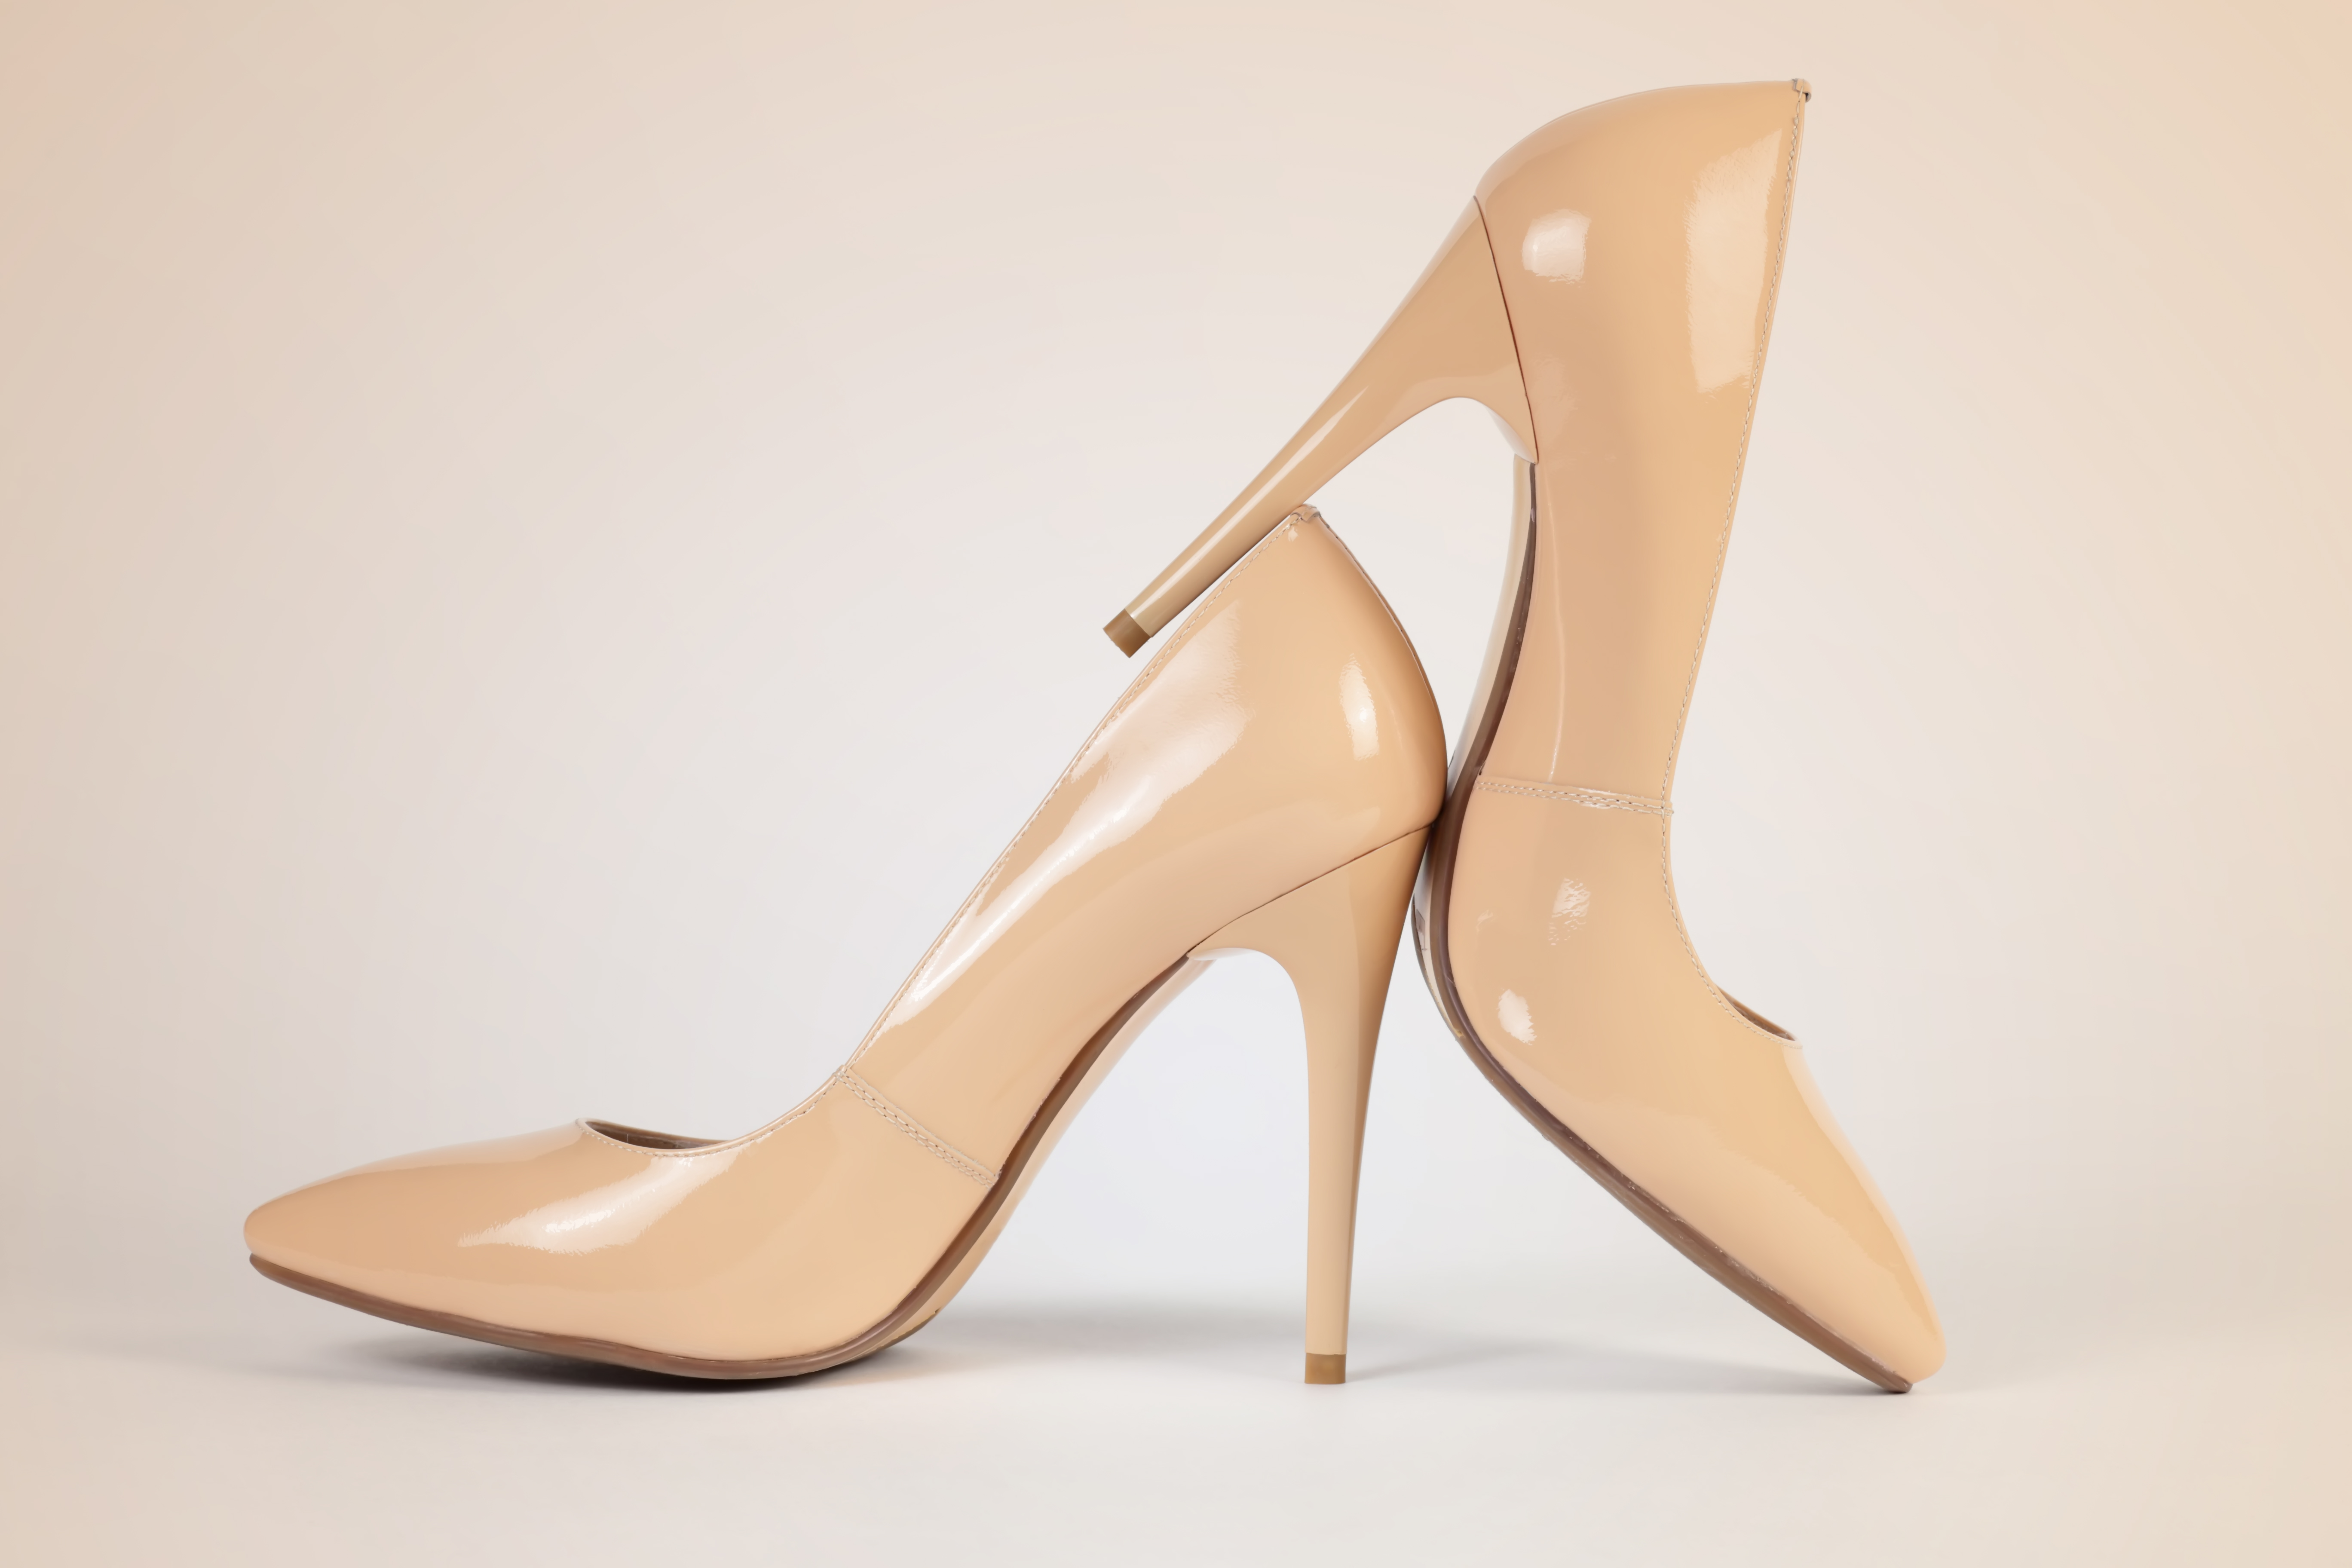 Christian louboutin's nude shoes reclaim the word for non